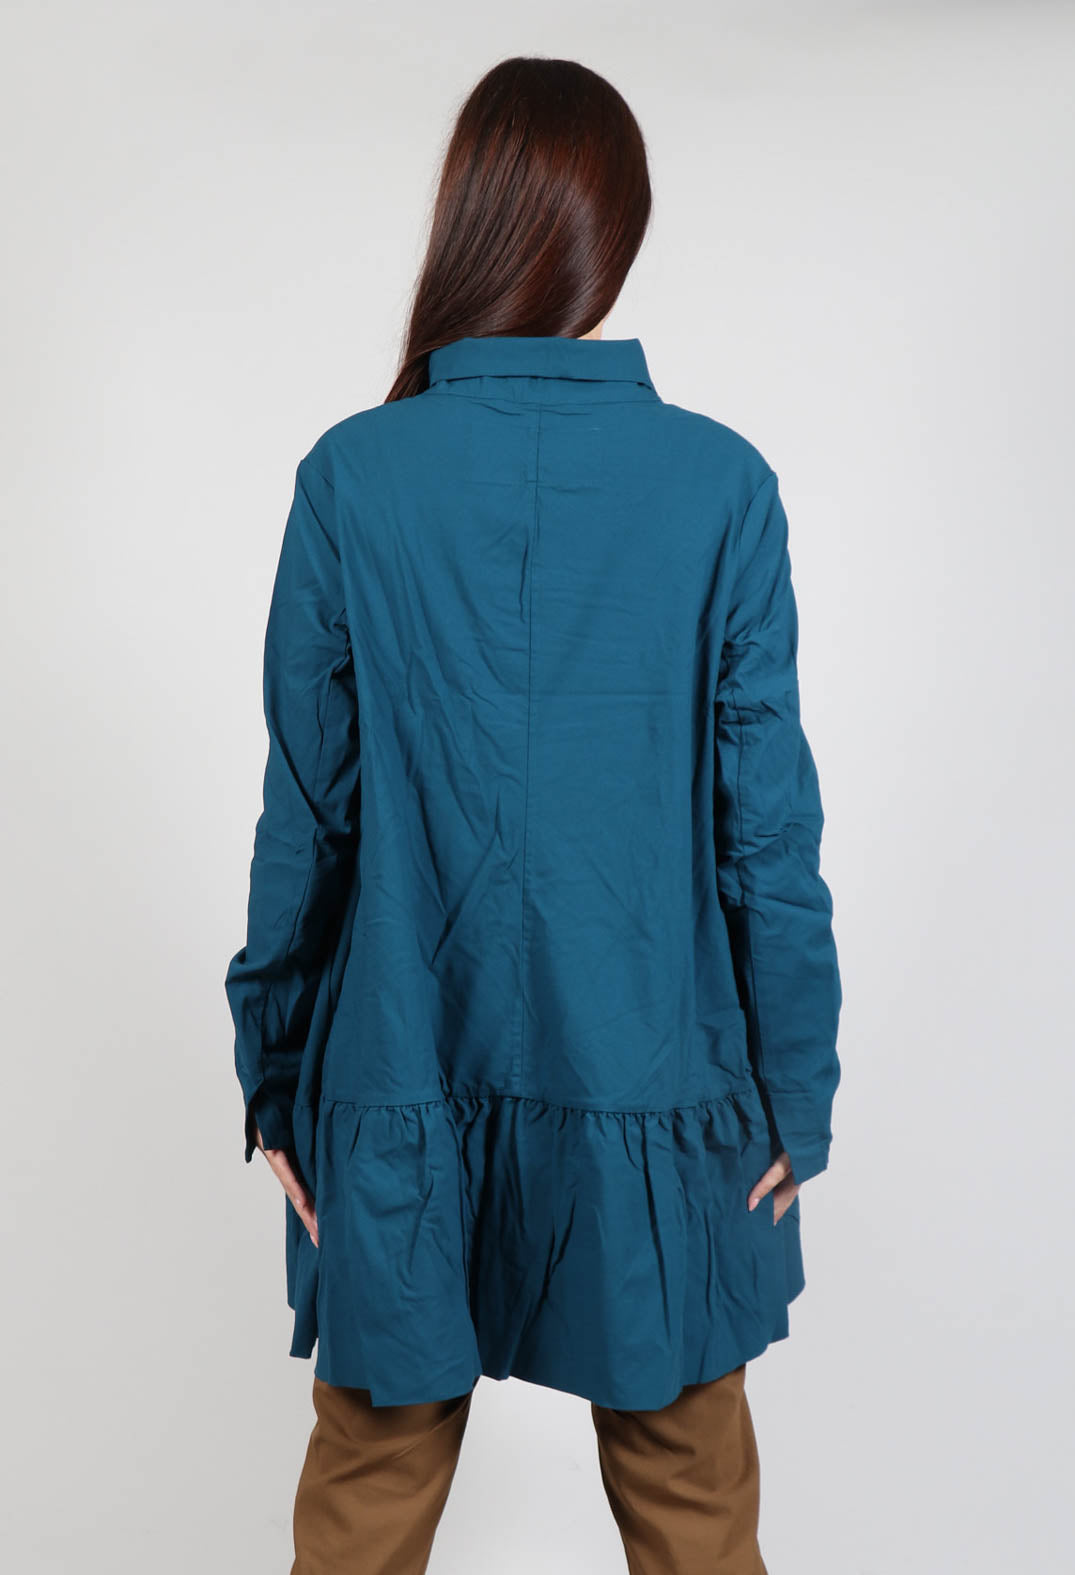 Jacket with High Low Peplum Hem in Ink